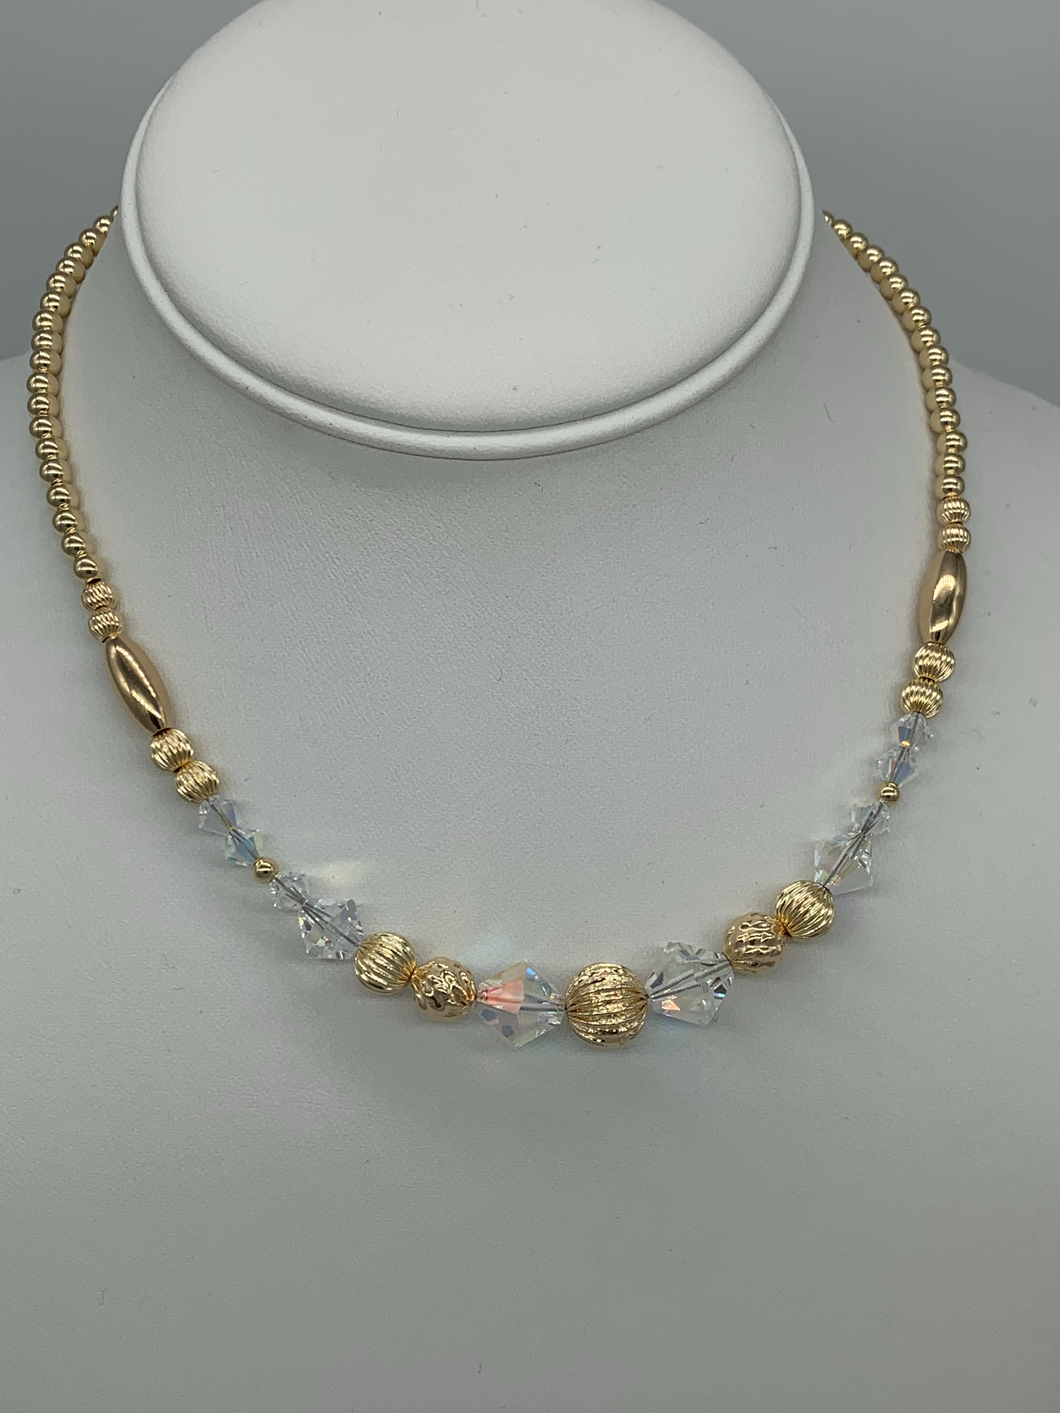 Kid Gold Filled Beaded Necklace with Crystals